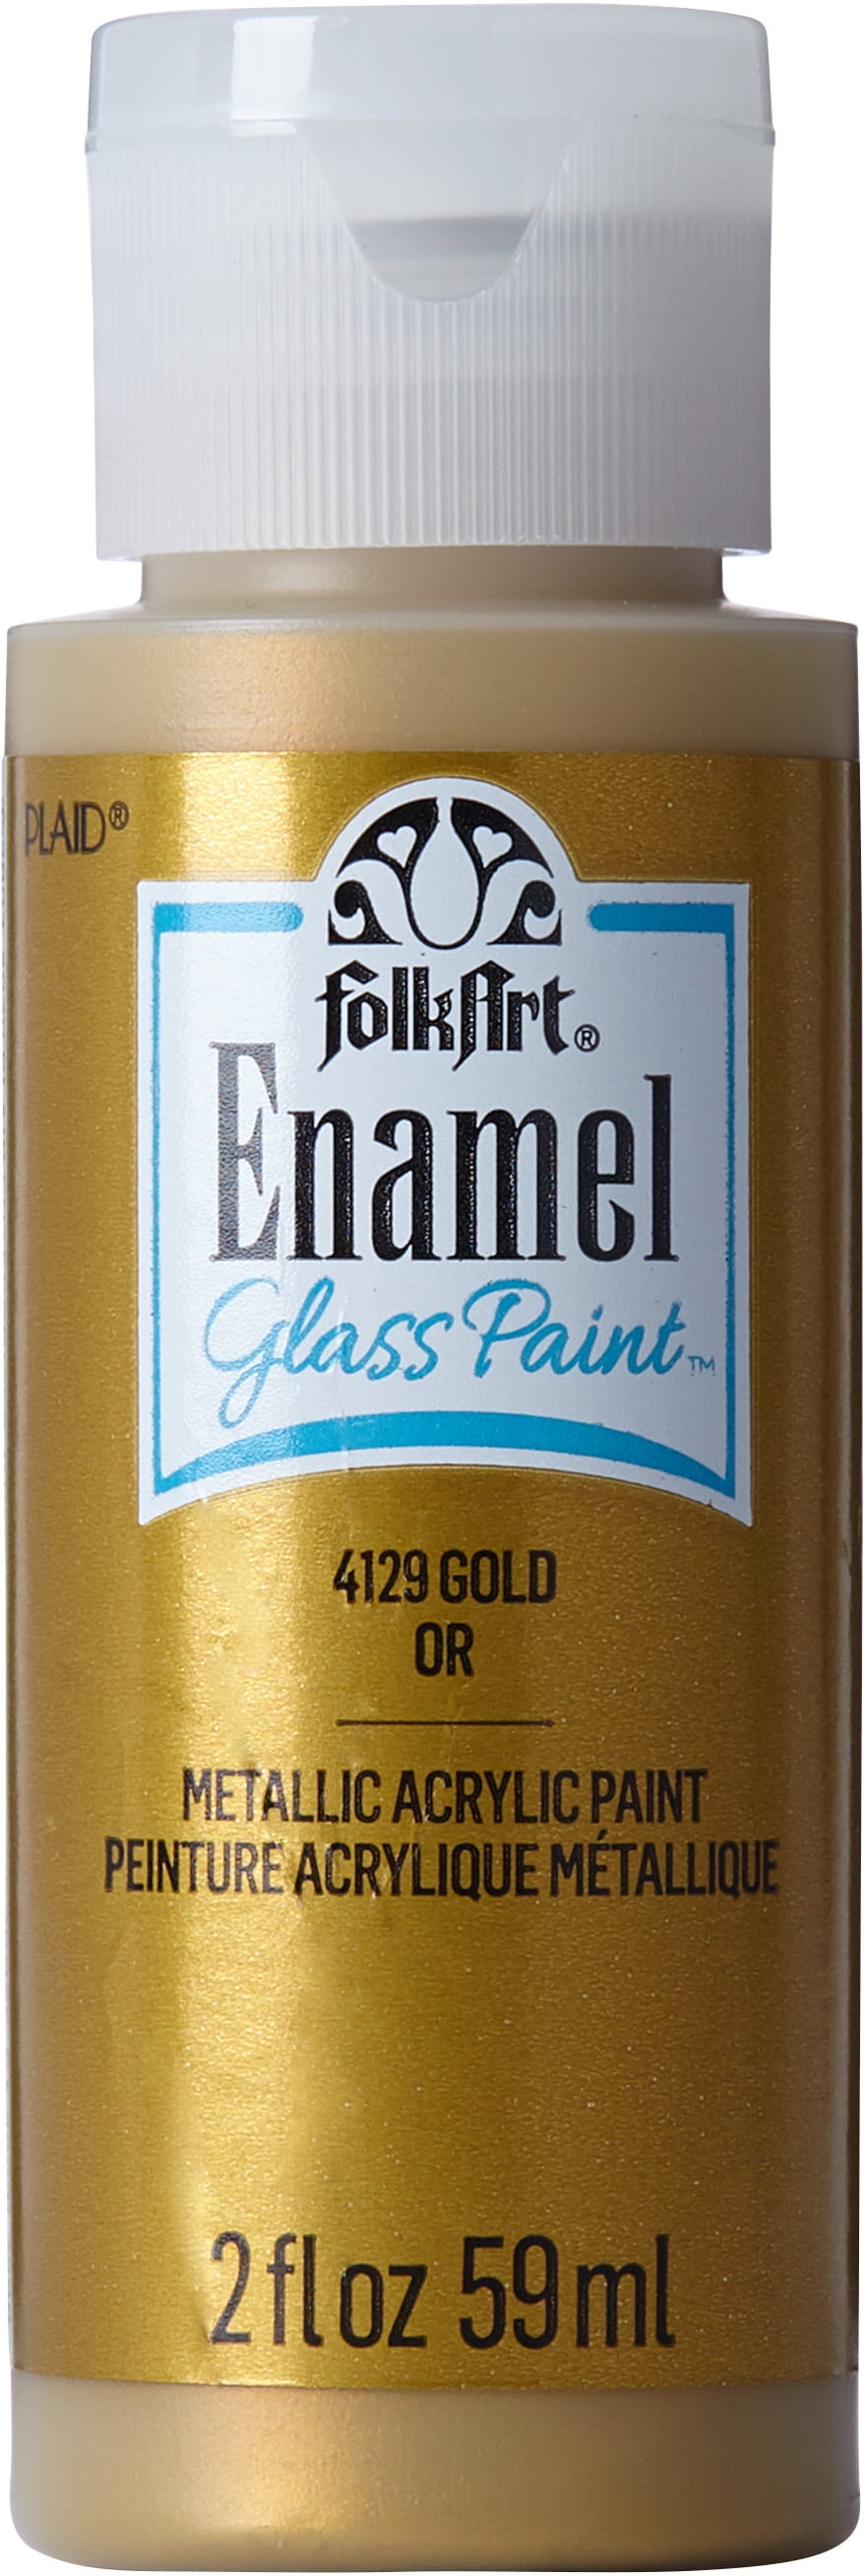 FolkArt Gloss Finish Acrylic Enamel Craft Set Designed for Beginners and  Artists, Non-Toxic Formula Perfect for Glass and Ceramic Painting, , 32